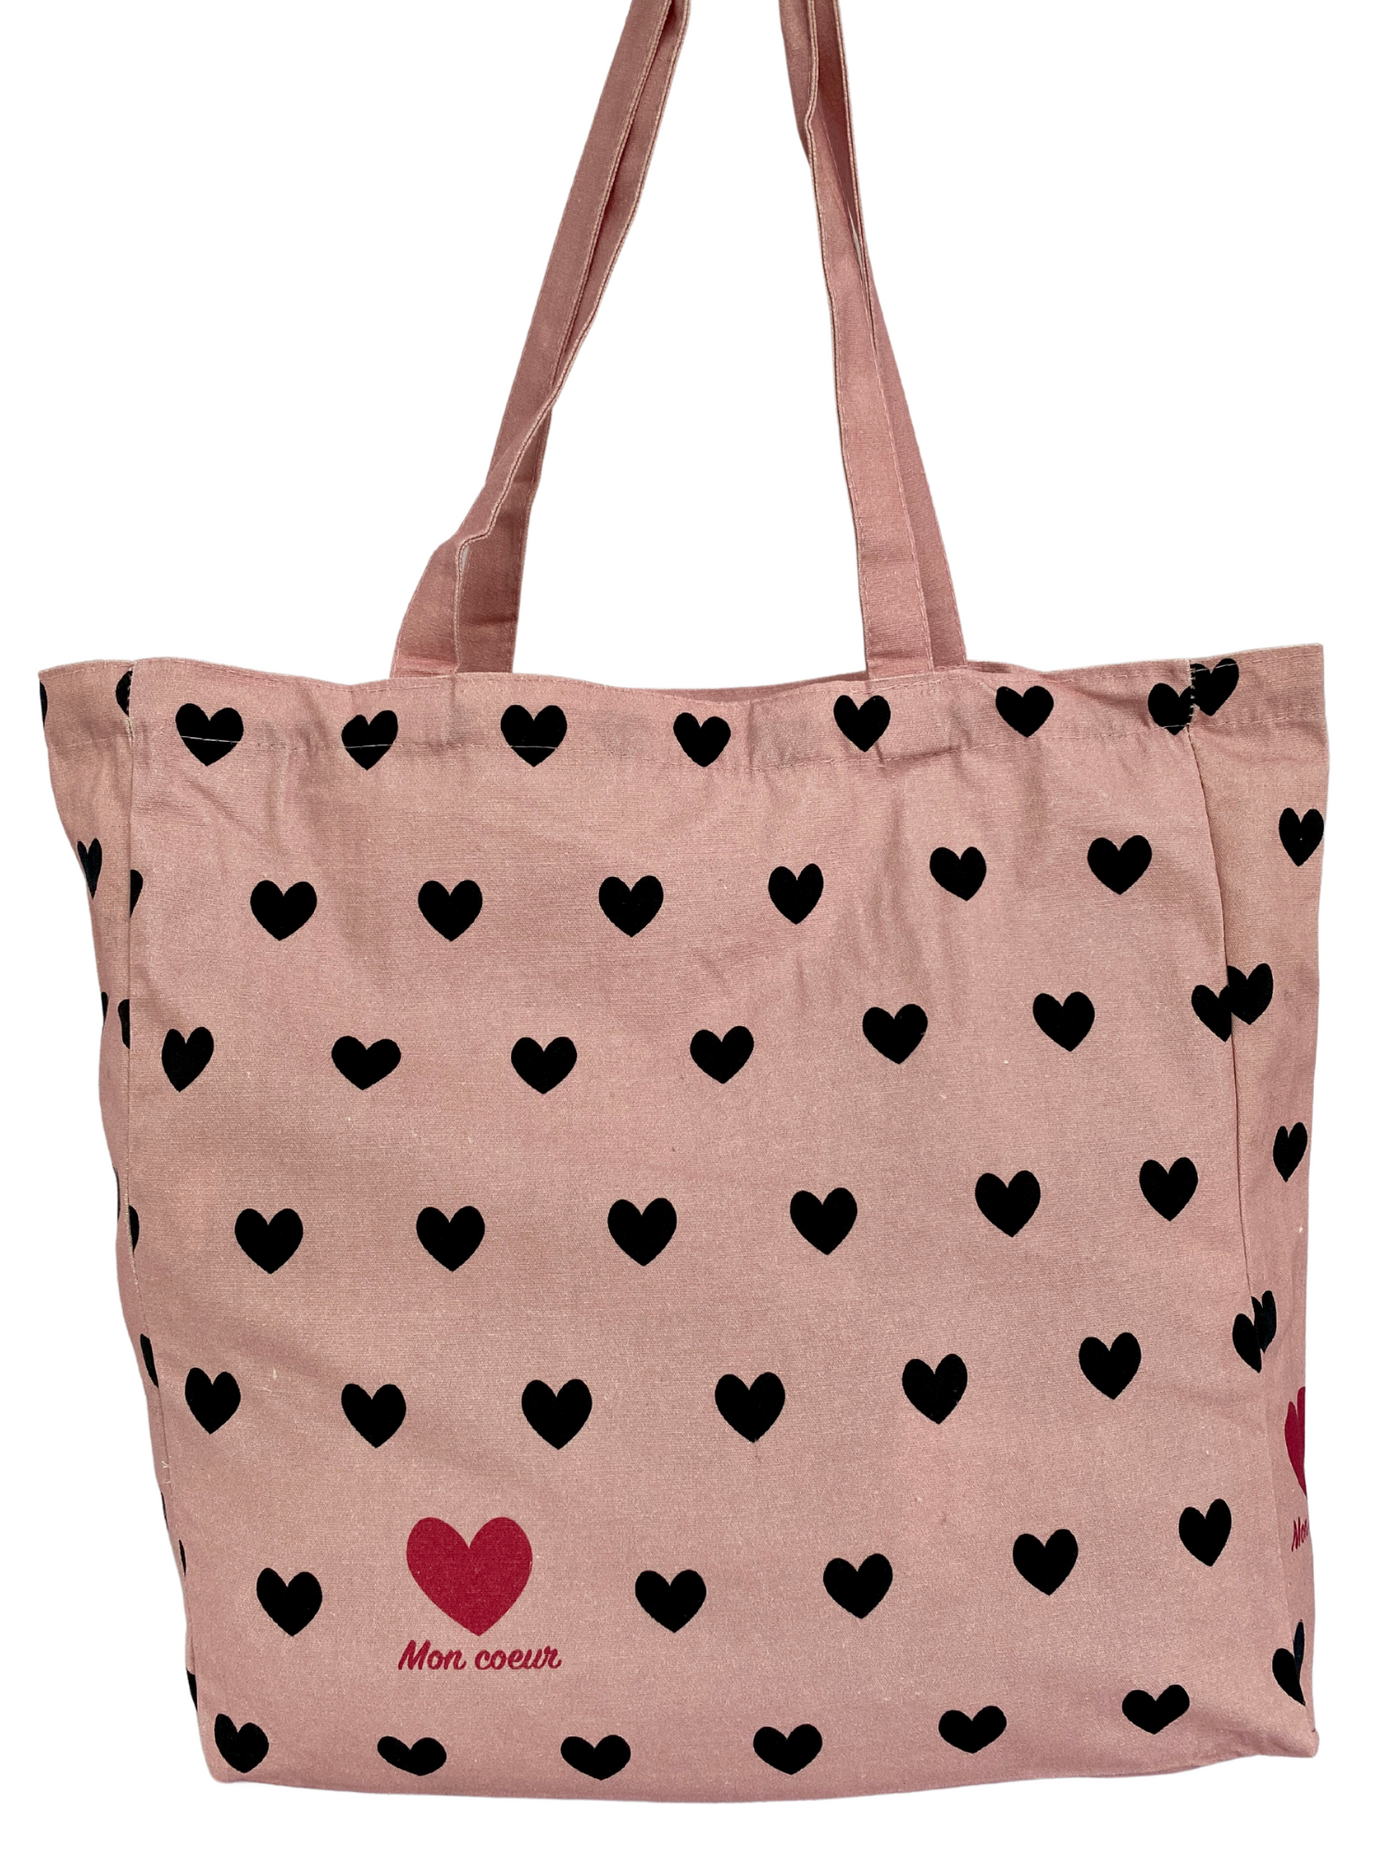 Illustrated Tote Bag: My Black Heart